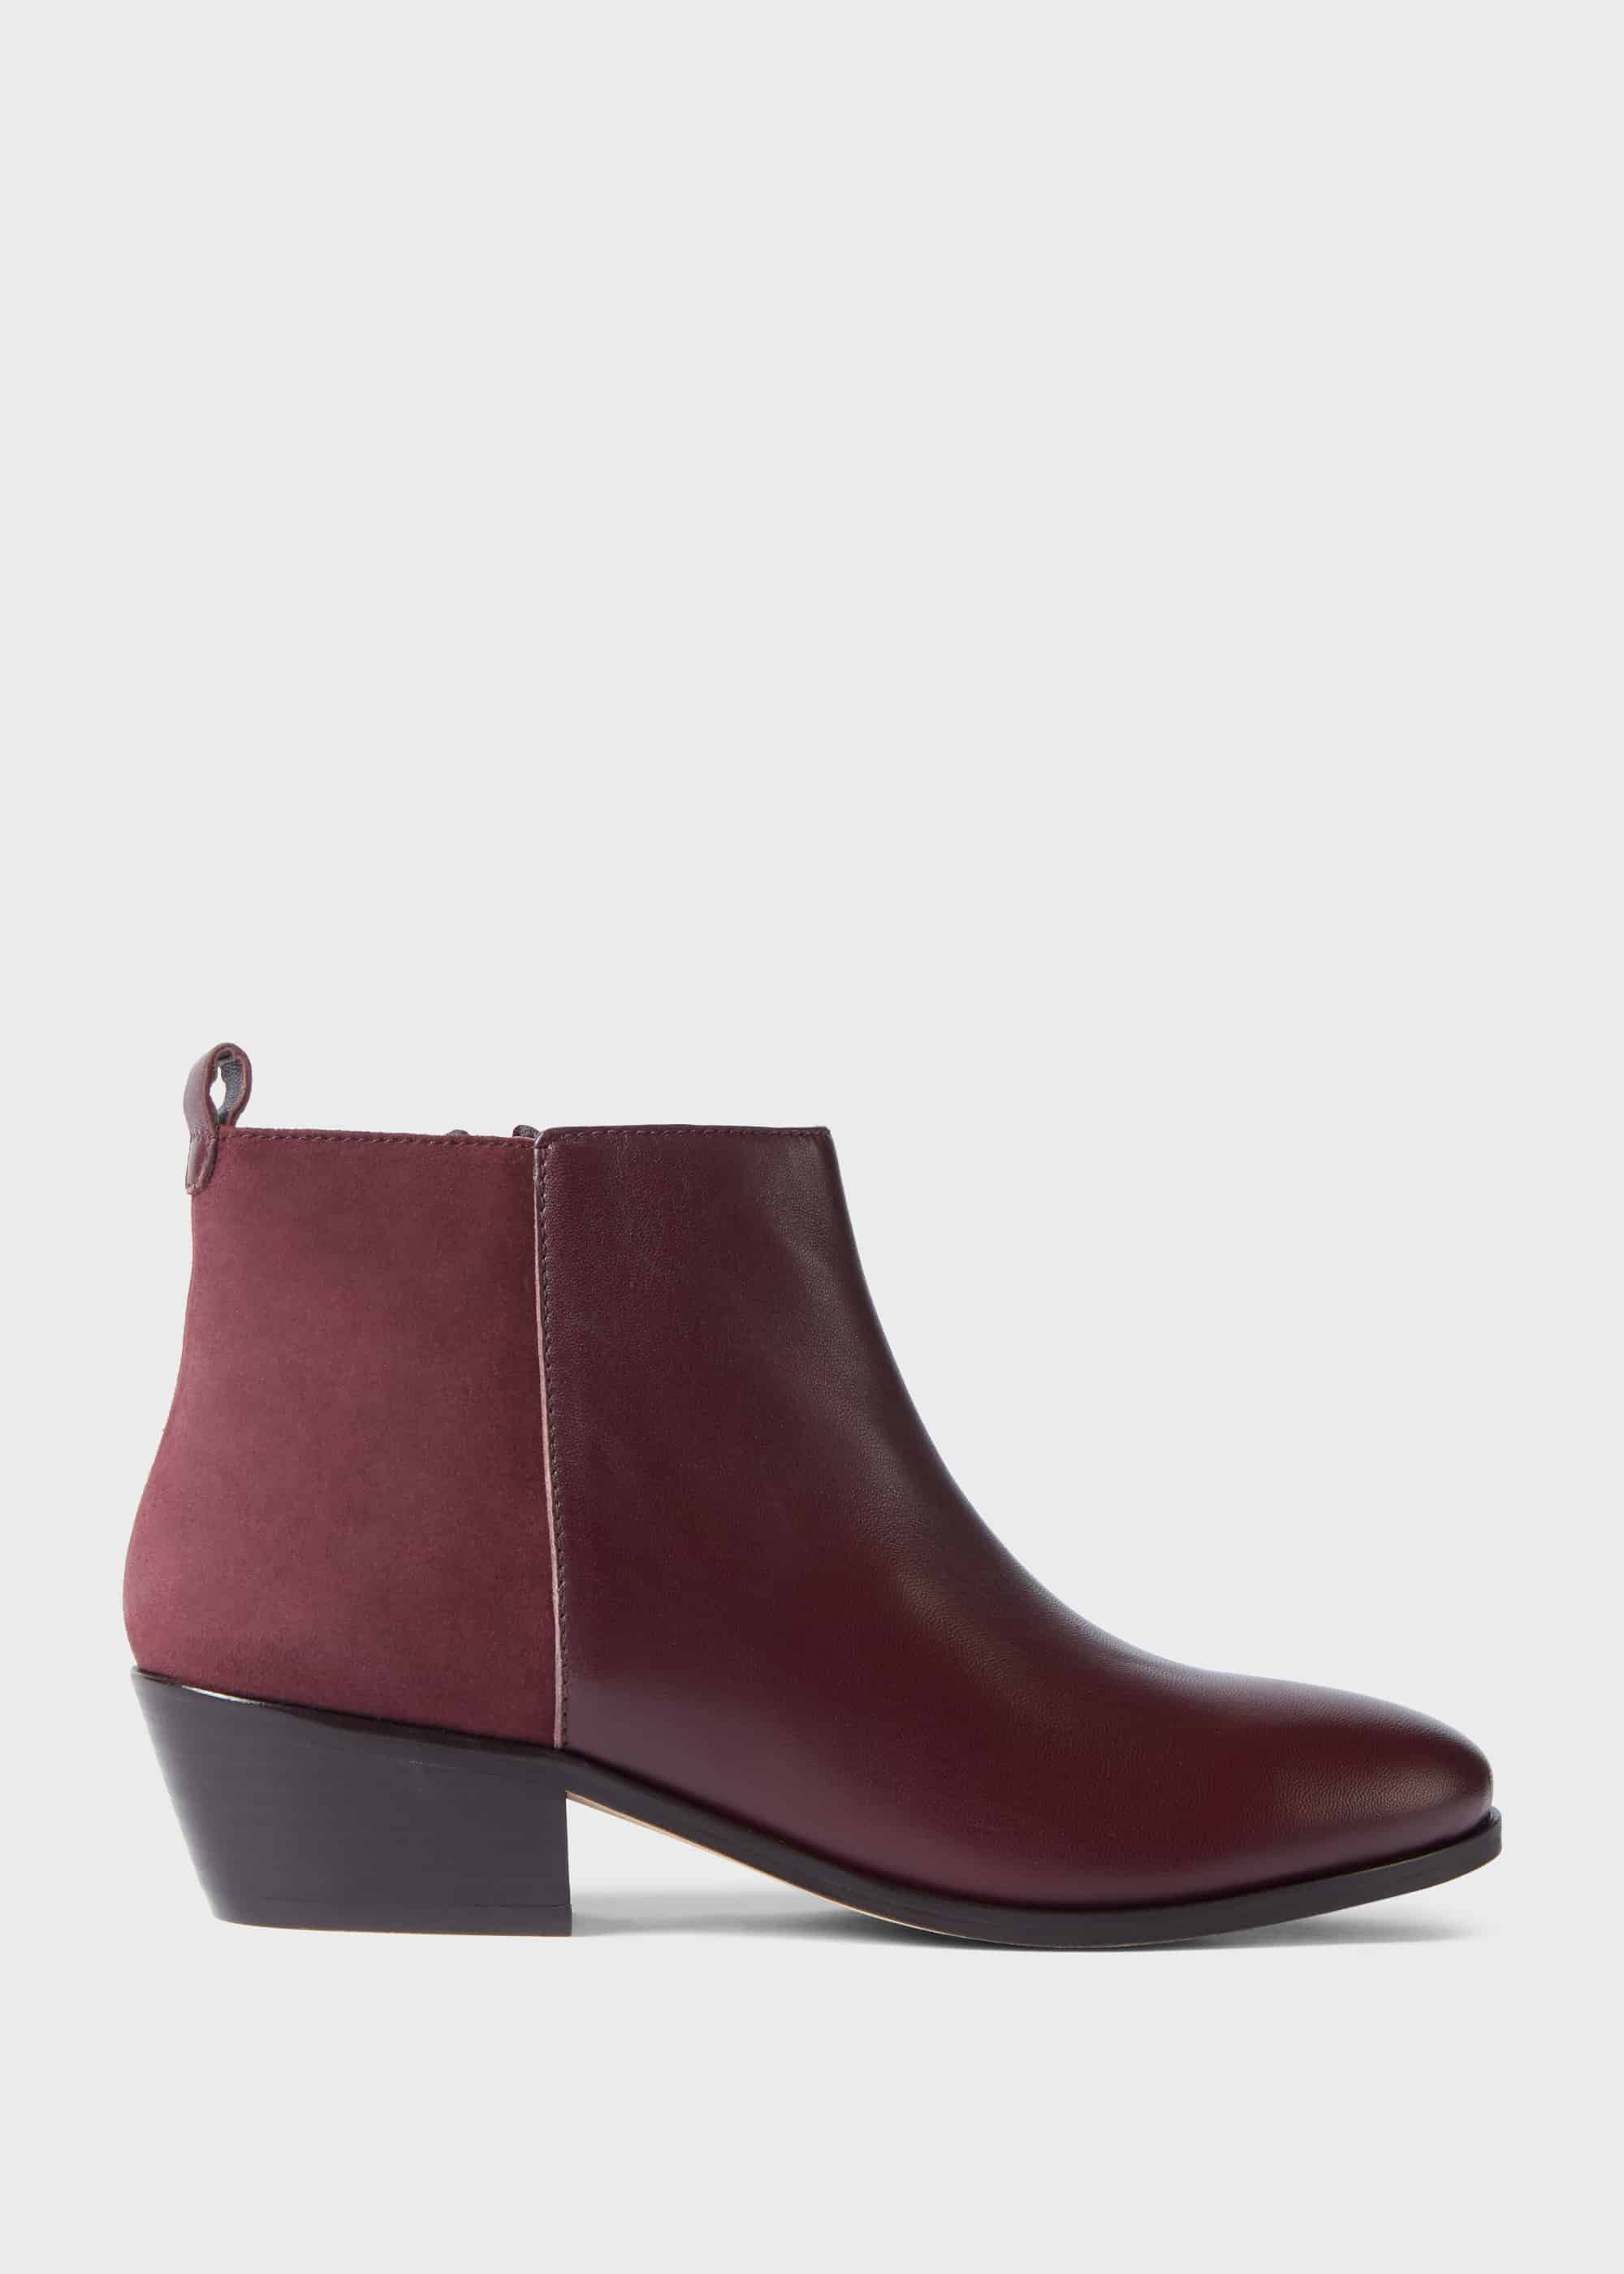 hobbs black ankle boots